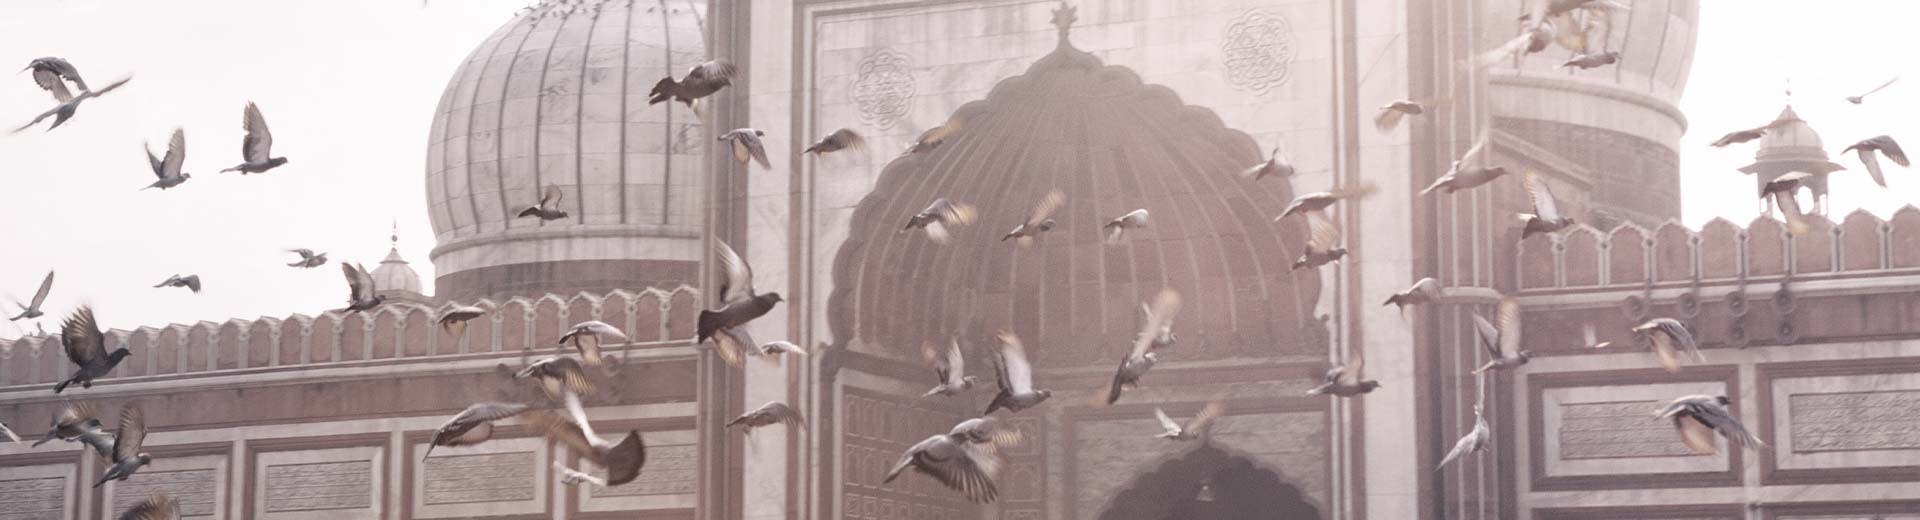 Pigeons fly above a domed building during sunset in Delhi